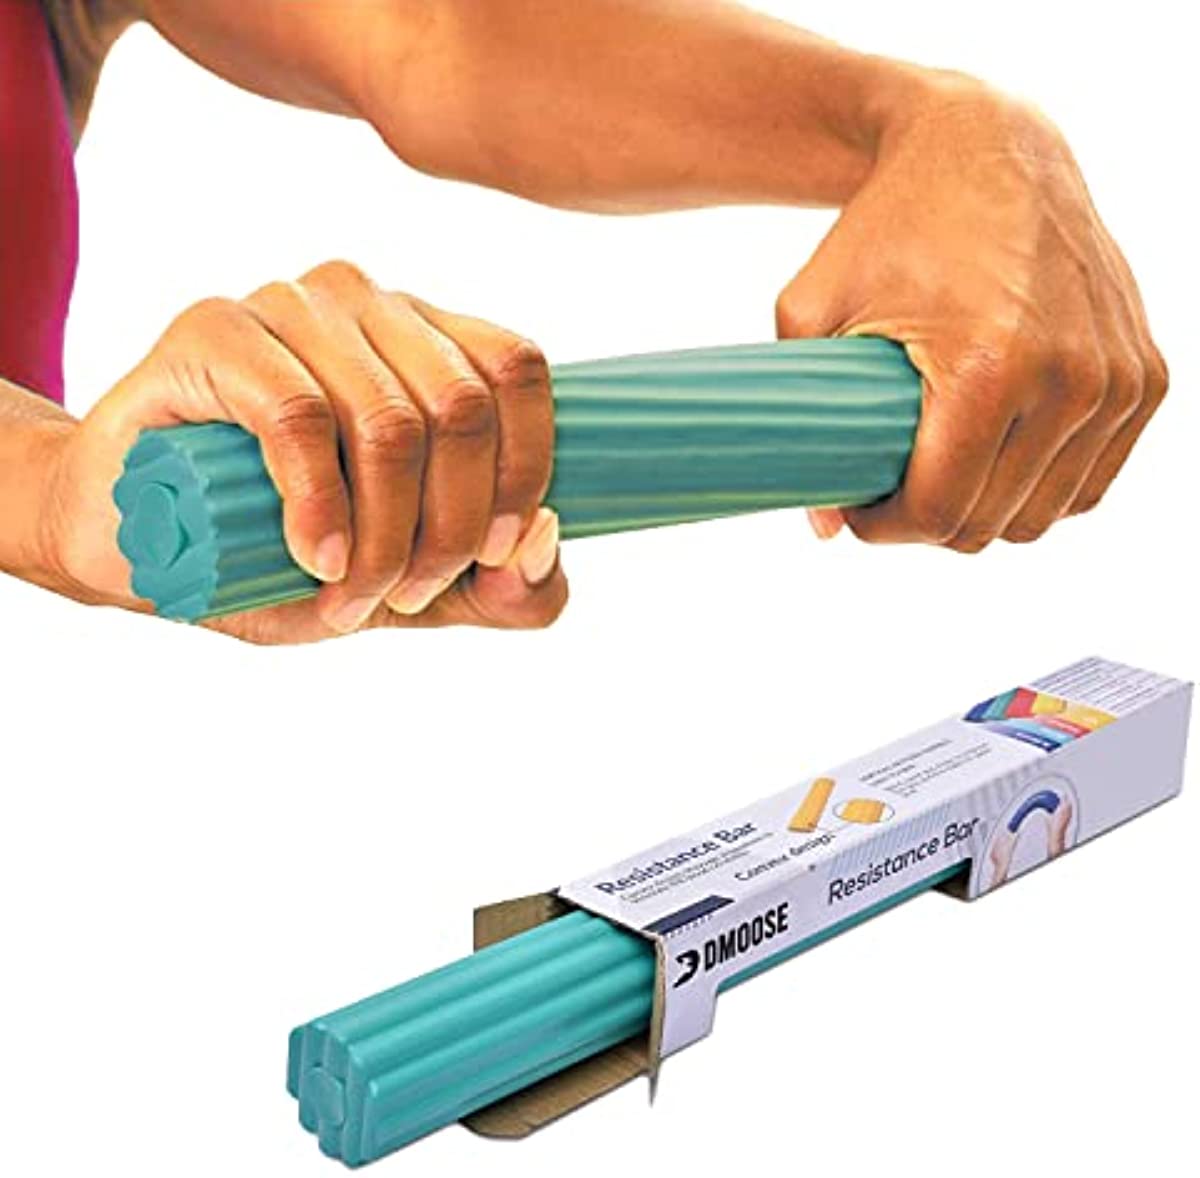 DMoose Flexbar for Physical Therapy, Relieves Tendonitis Pain & Improve Grip Strength, Strong and Flexible Non-slip Grip, Resistance Bar for Injury Recovery, Forearm Therapy & Tennis Elbow Treatment